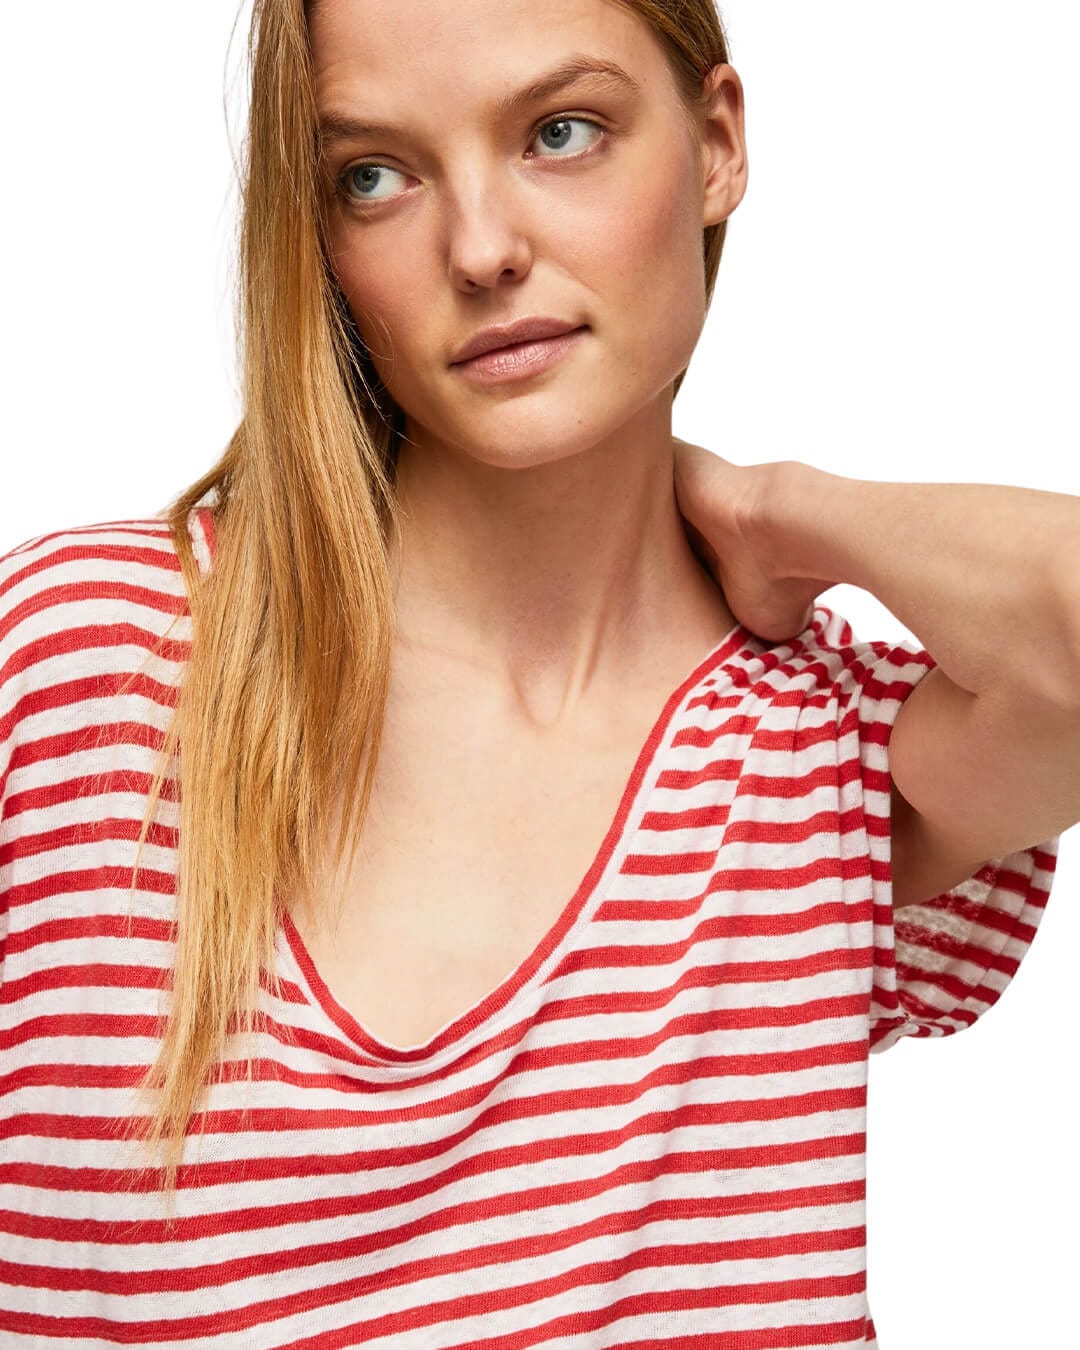 Pepe Jeans T-Shirts Pepe Jeans Red Striped Print T-Shirt